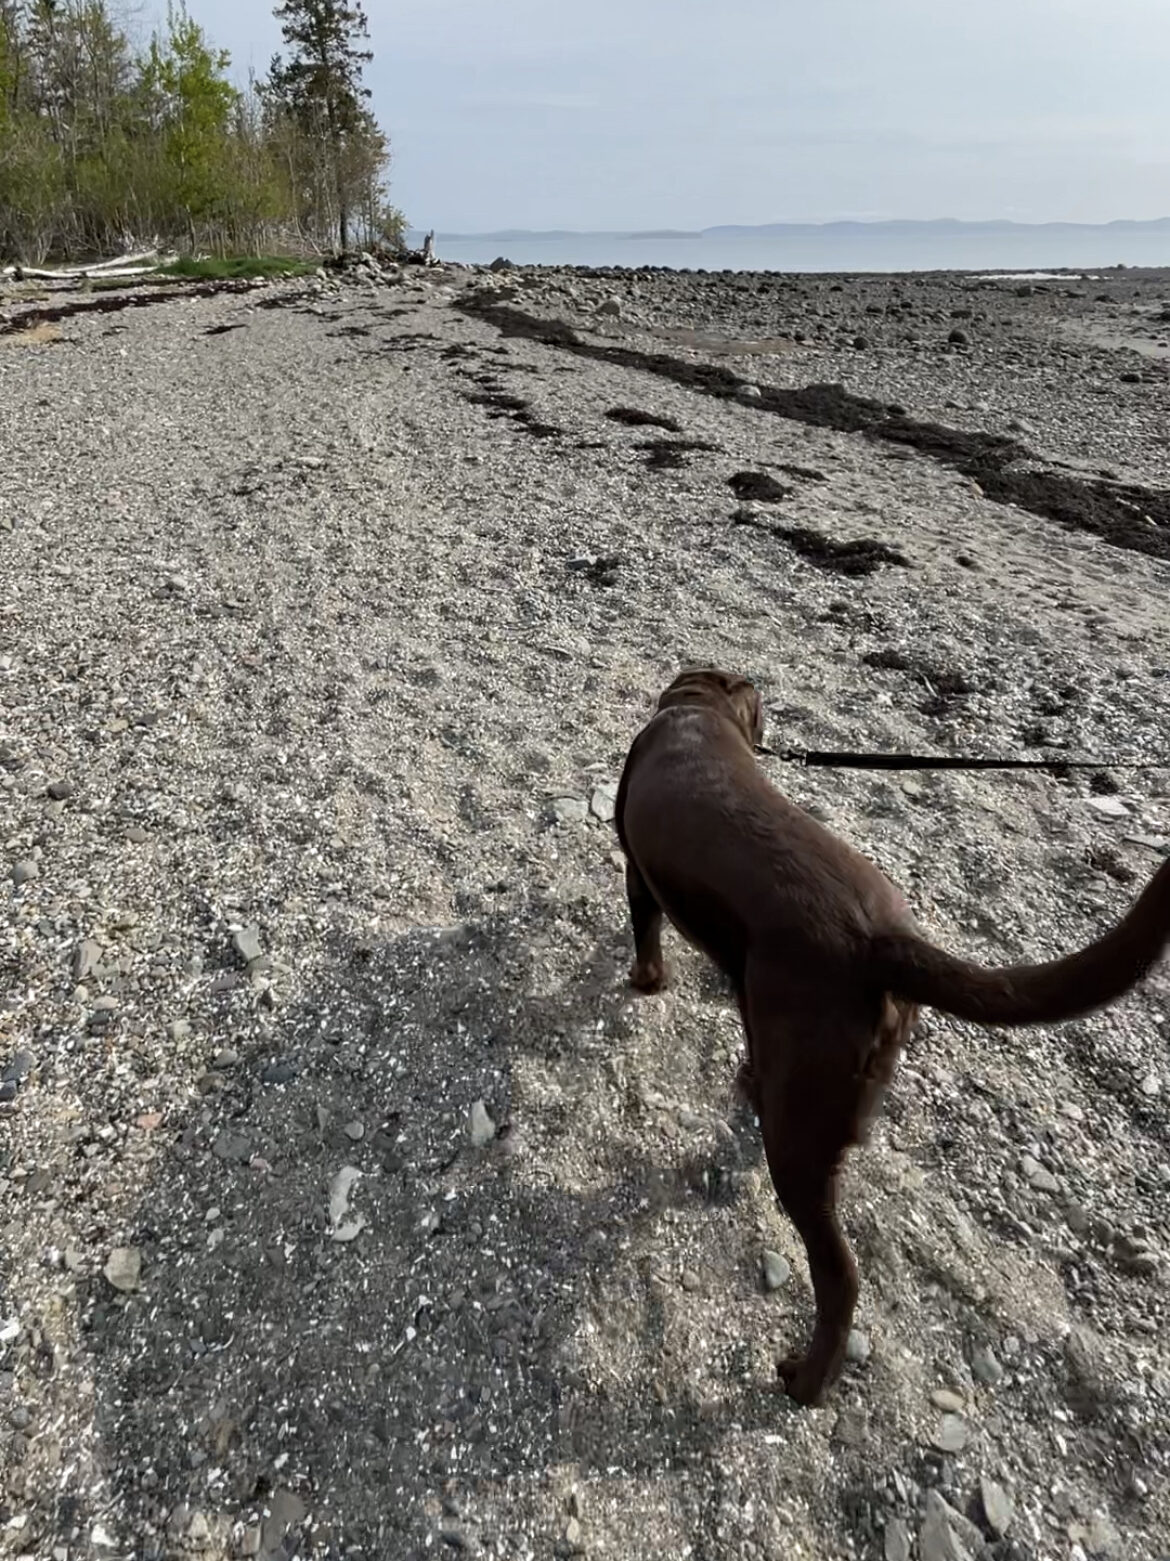 My Labrador retriever walks on the beach at Pagan Point Nature Preserve. Dogs are allowed on leash.